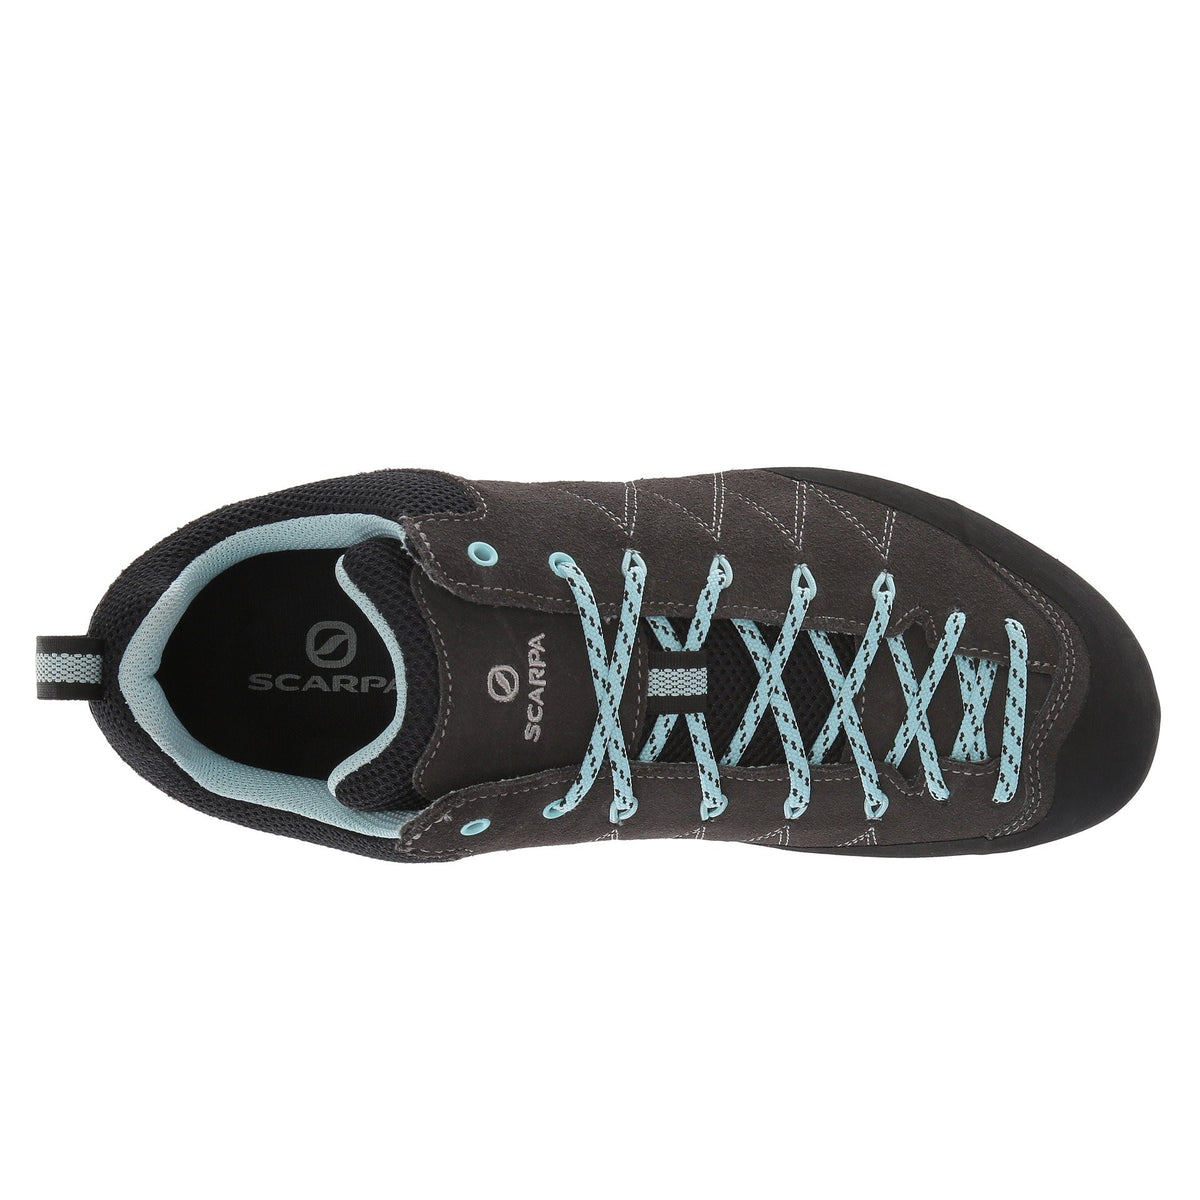 Scarpa Crux Womens approach shoe, as seen from above